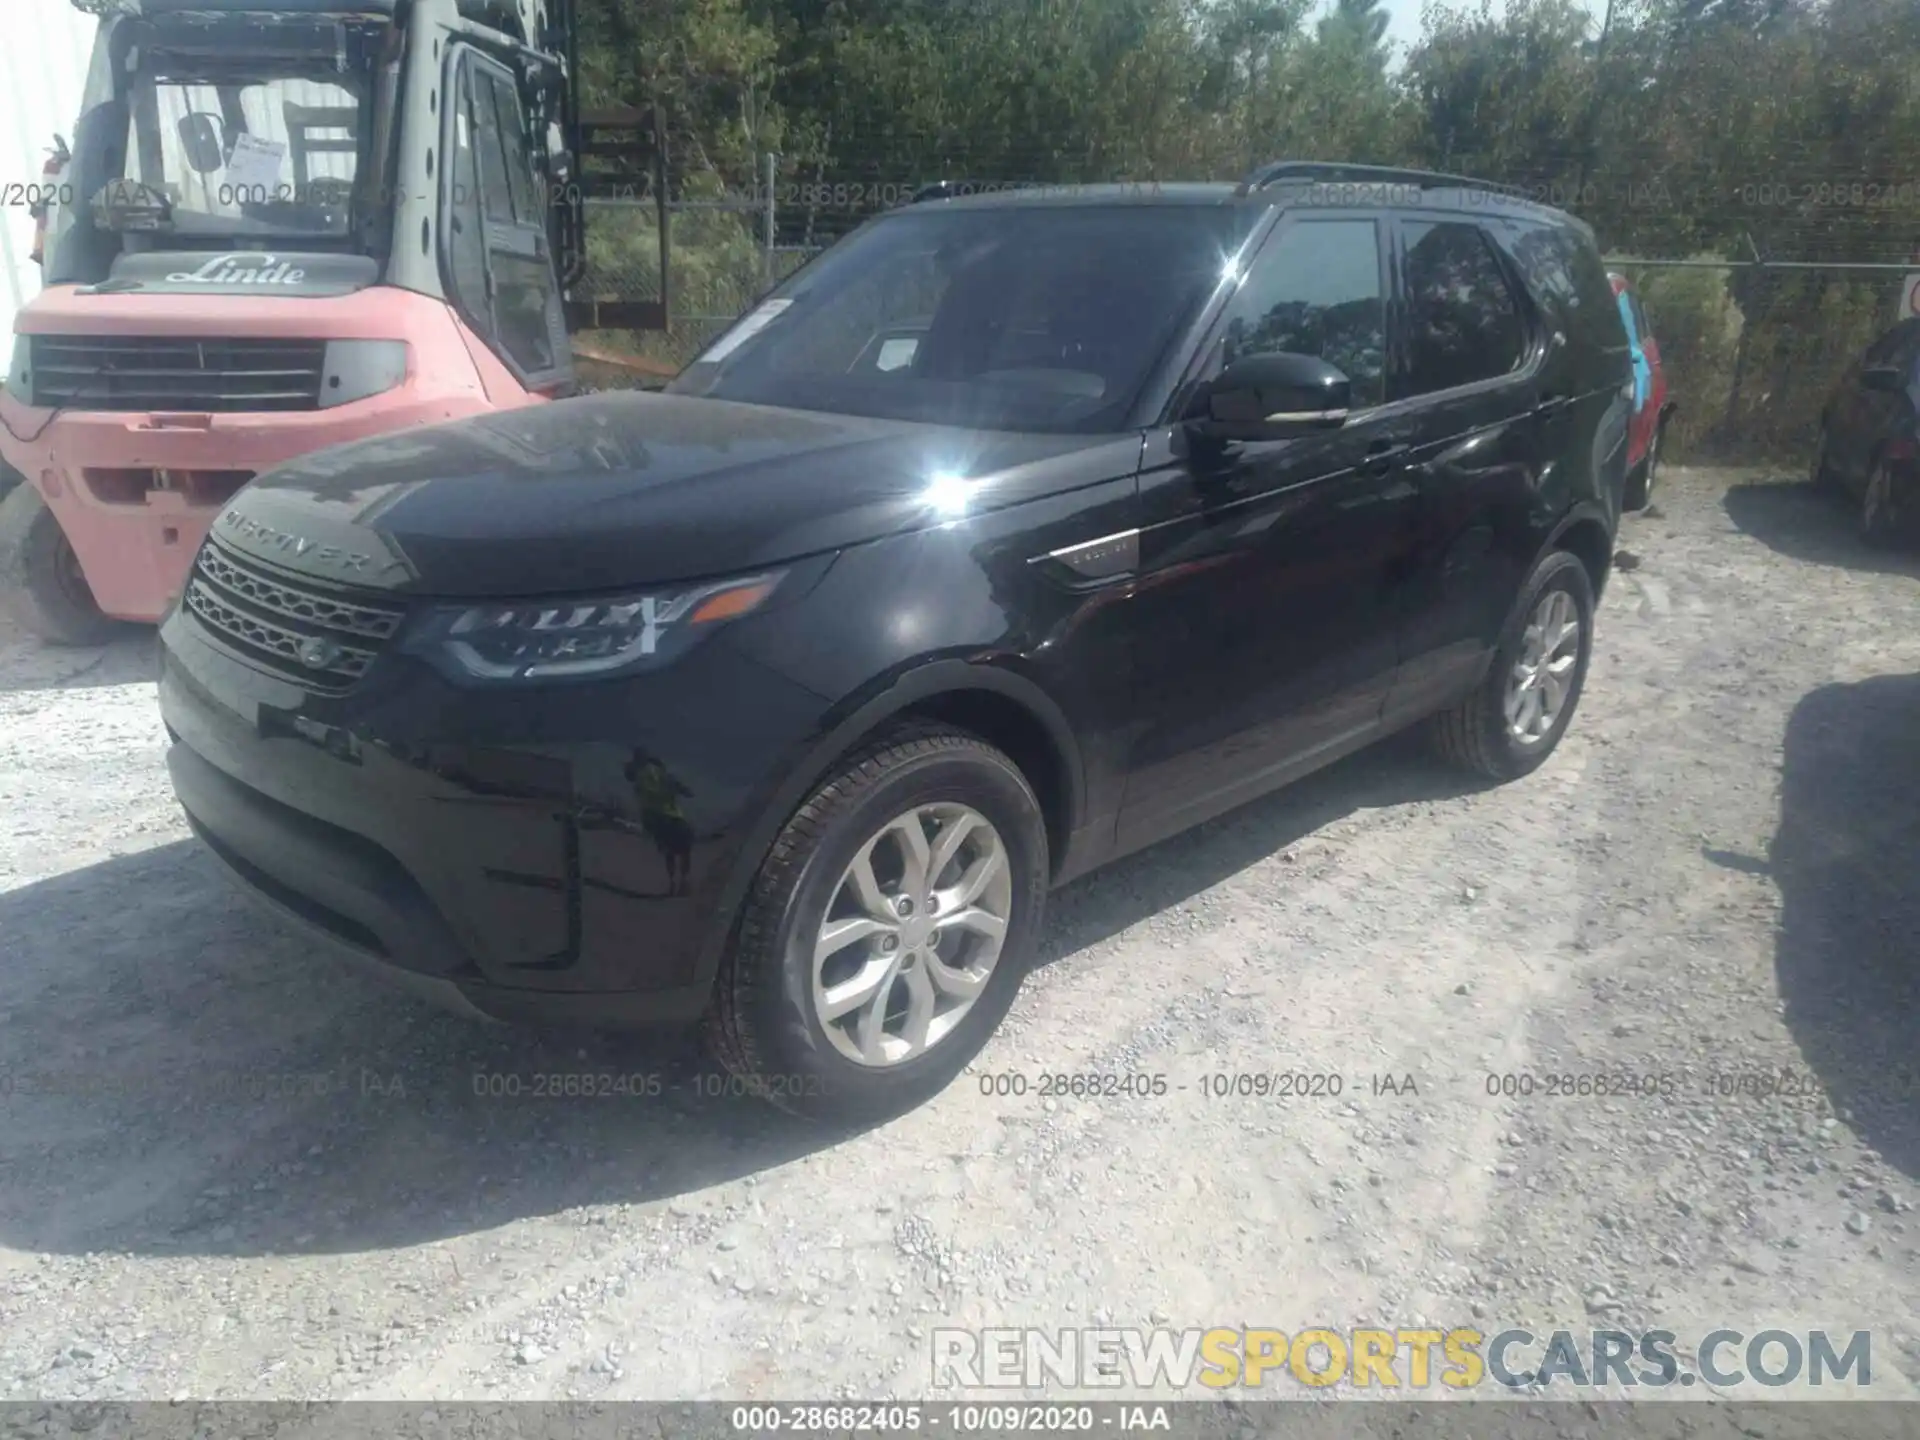 2 Photograph of a damaged car SALRG2RV1L2433289 LAND ROVER DISCOVERY 2020